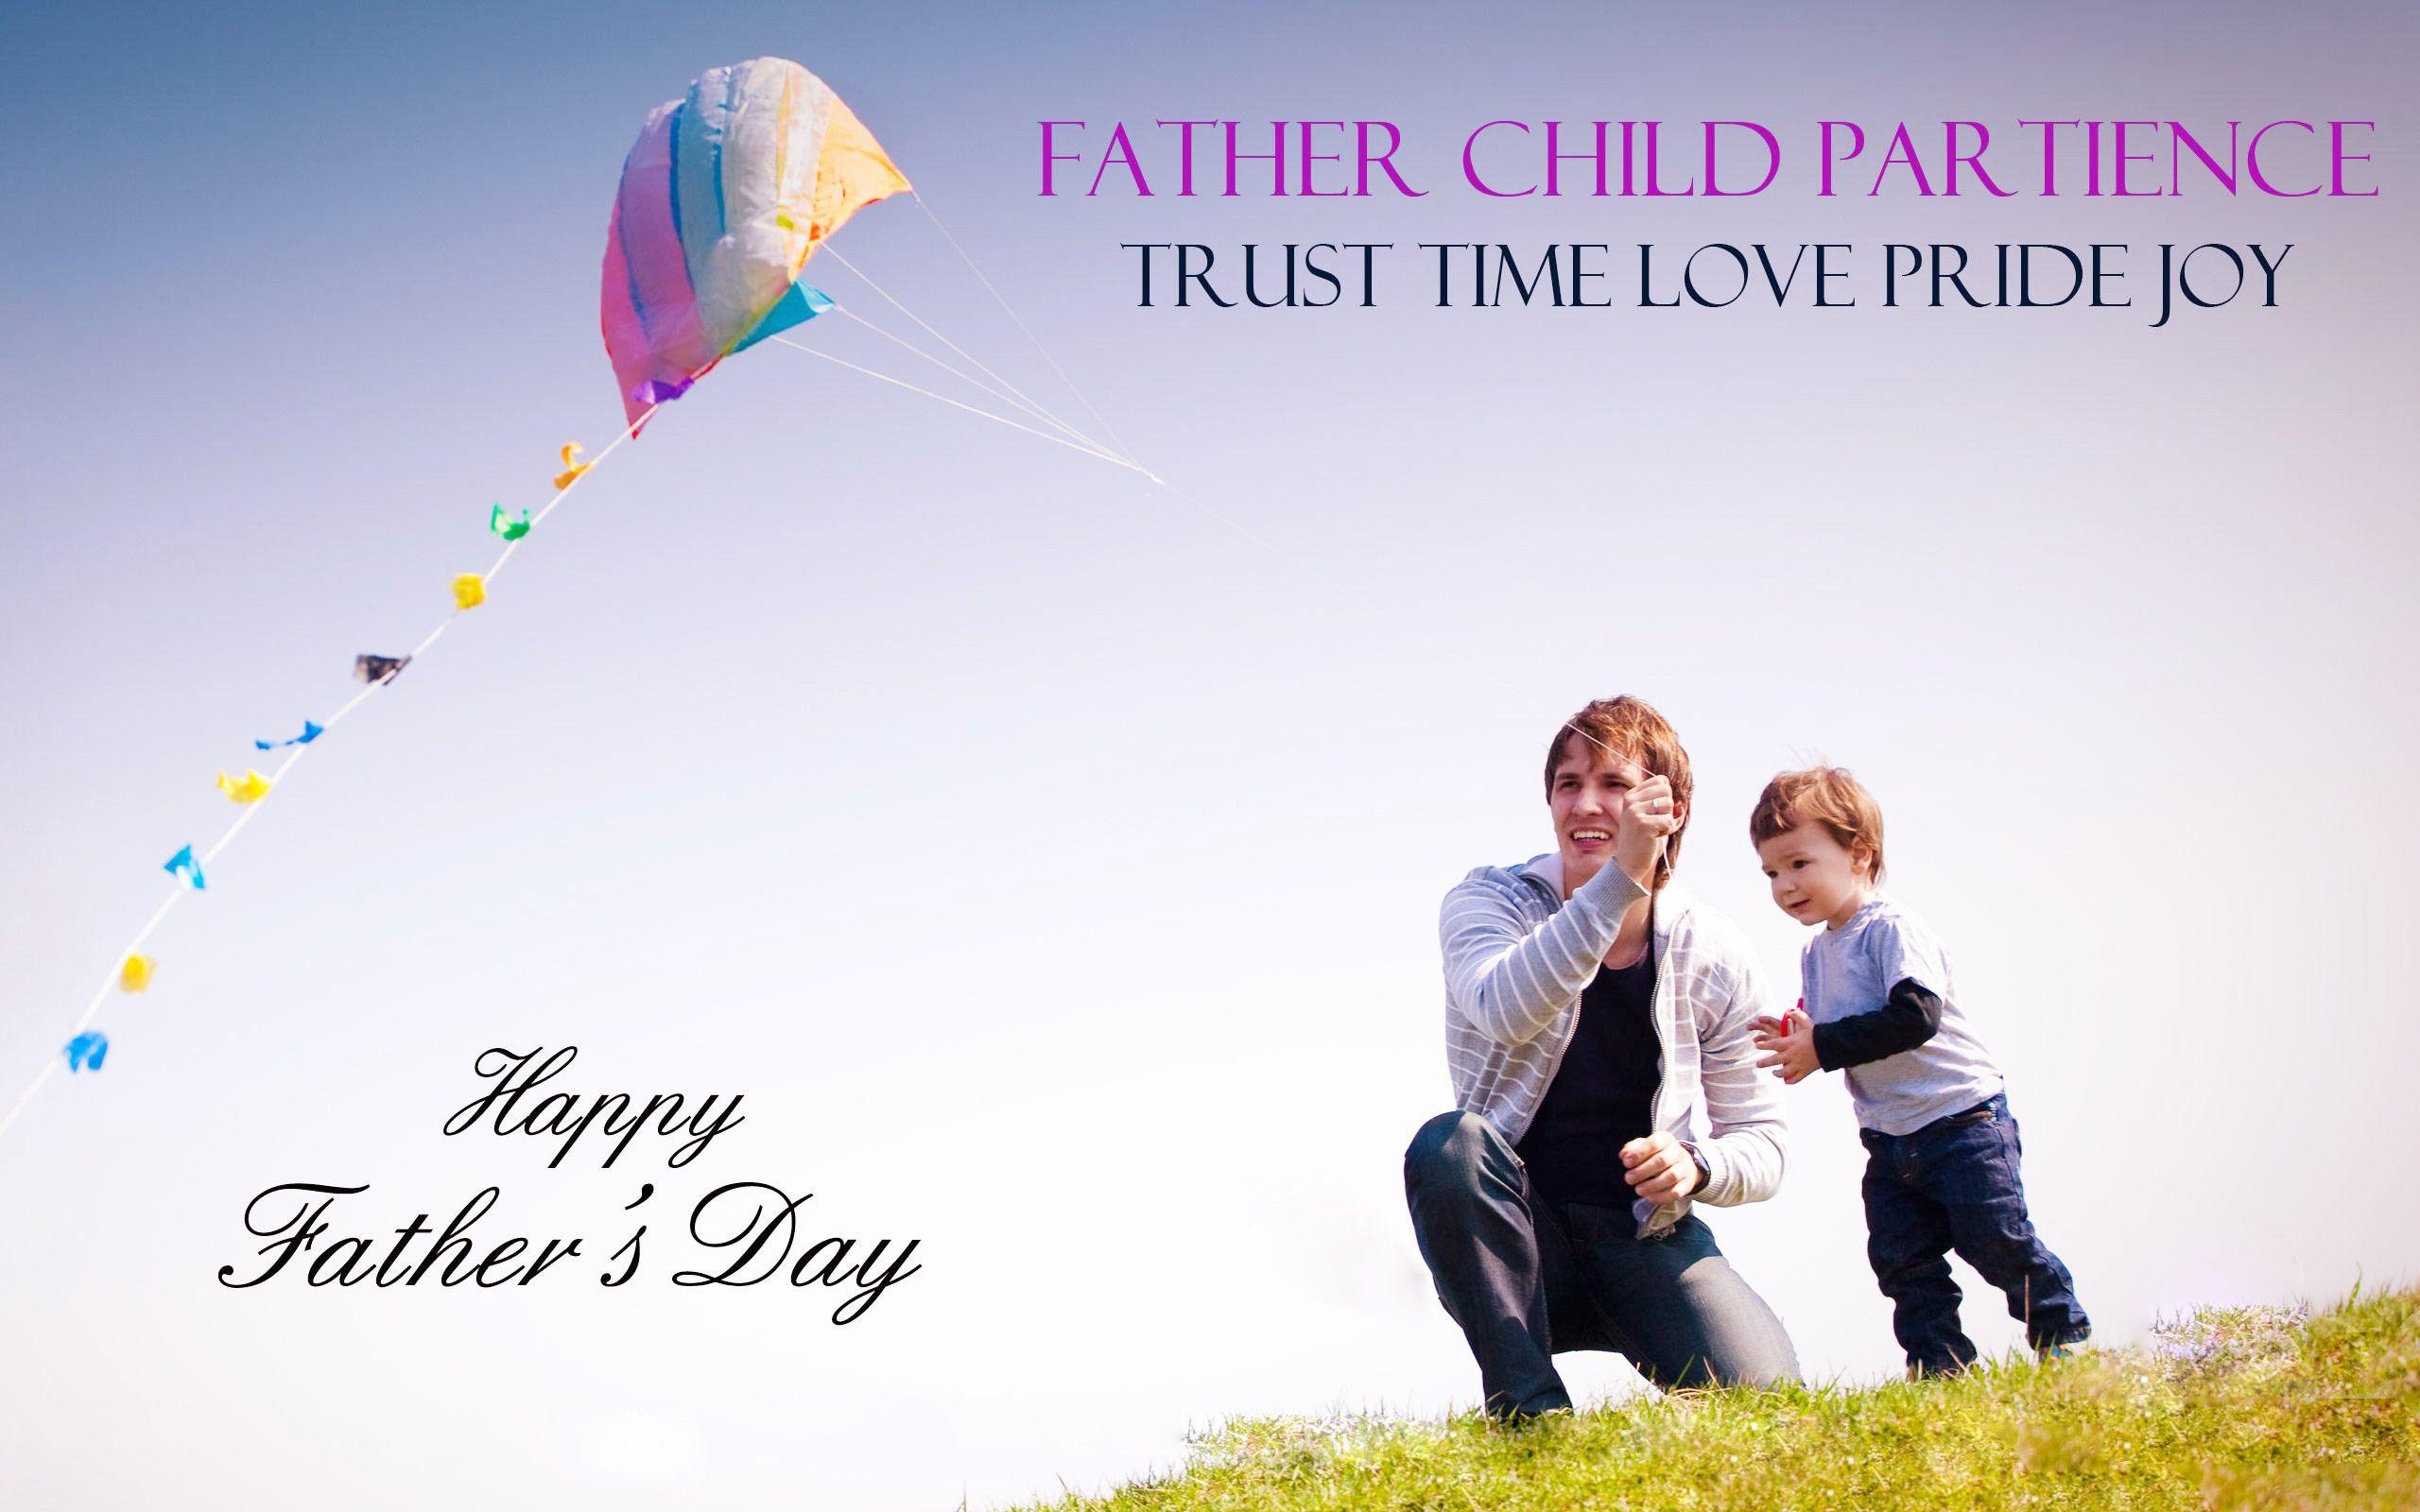 Happy Father's Day 2015 Image Wallpaper HD Wallpaper